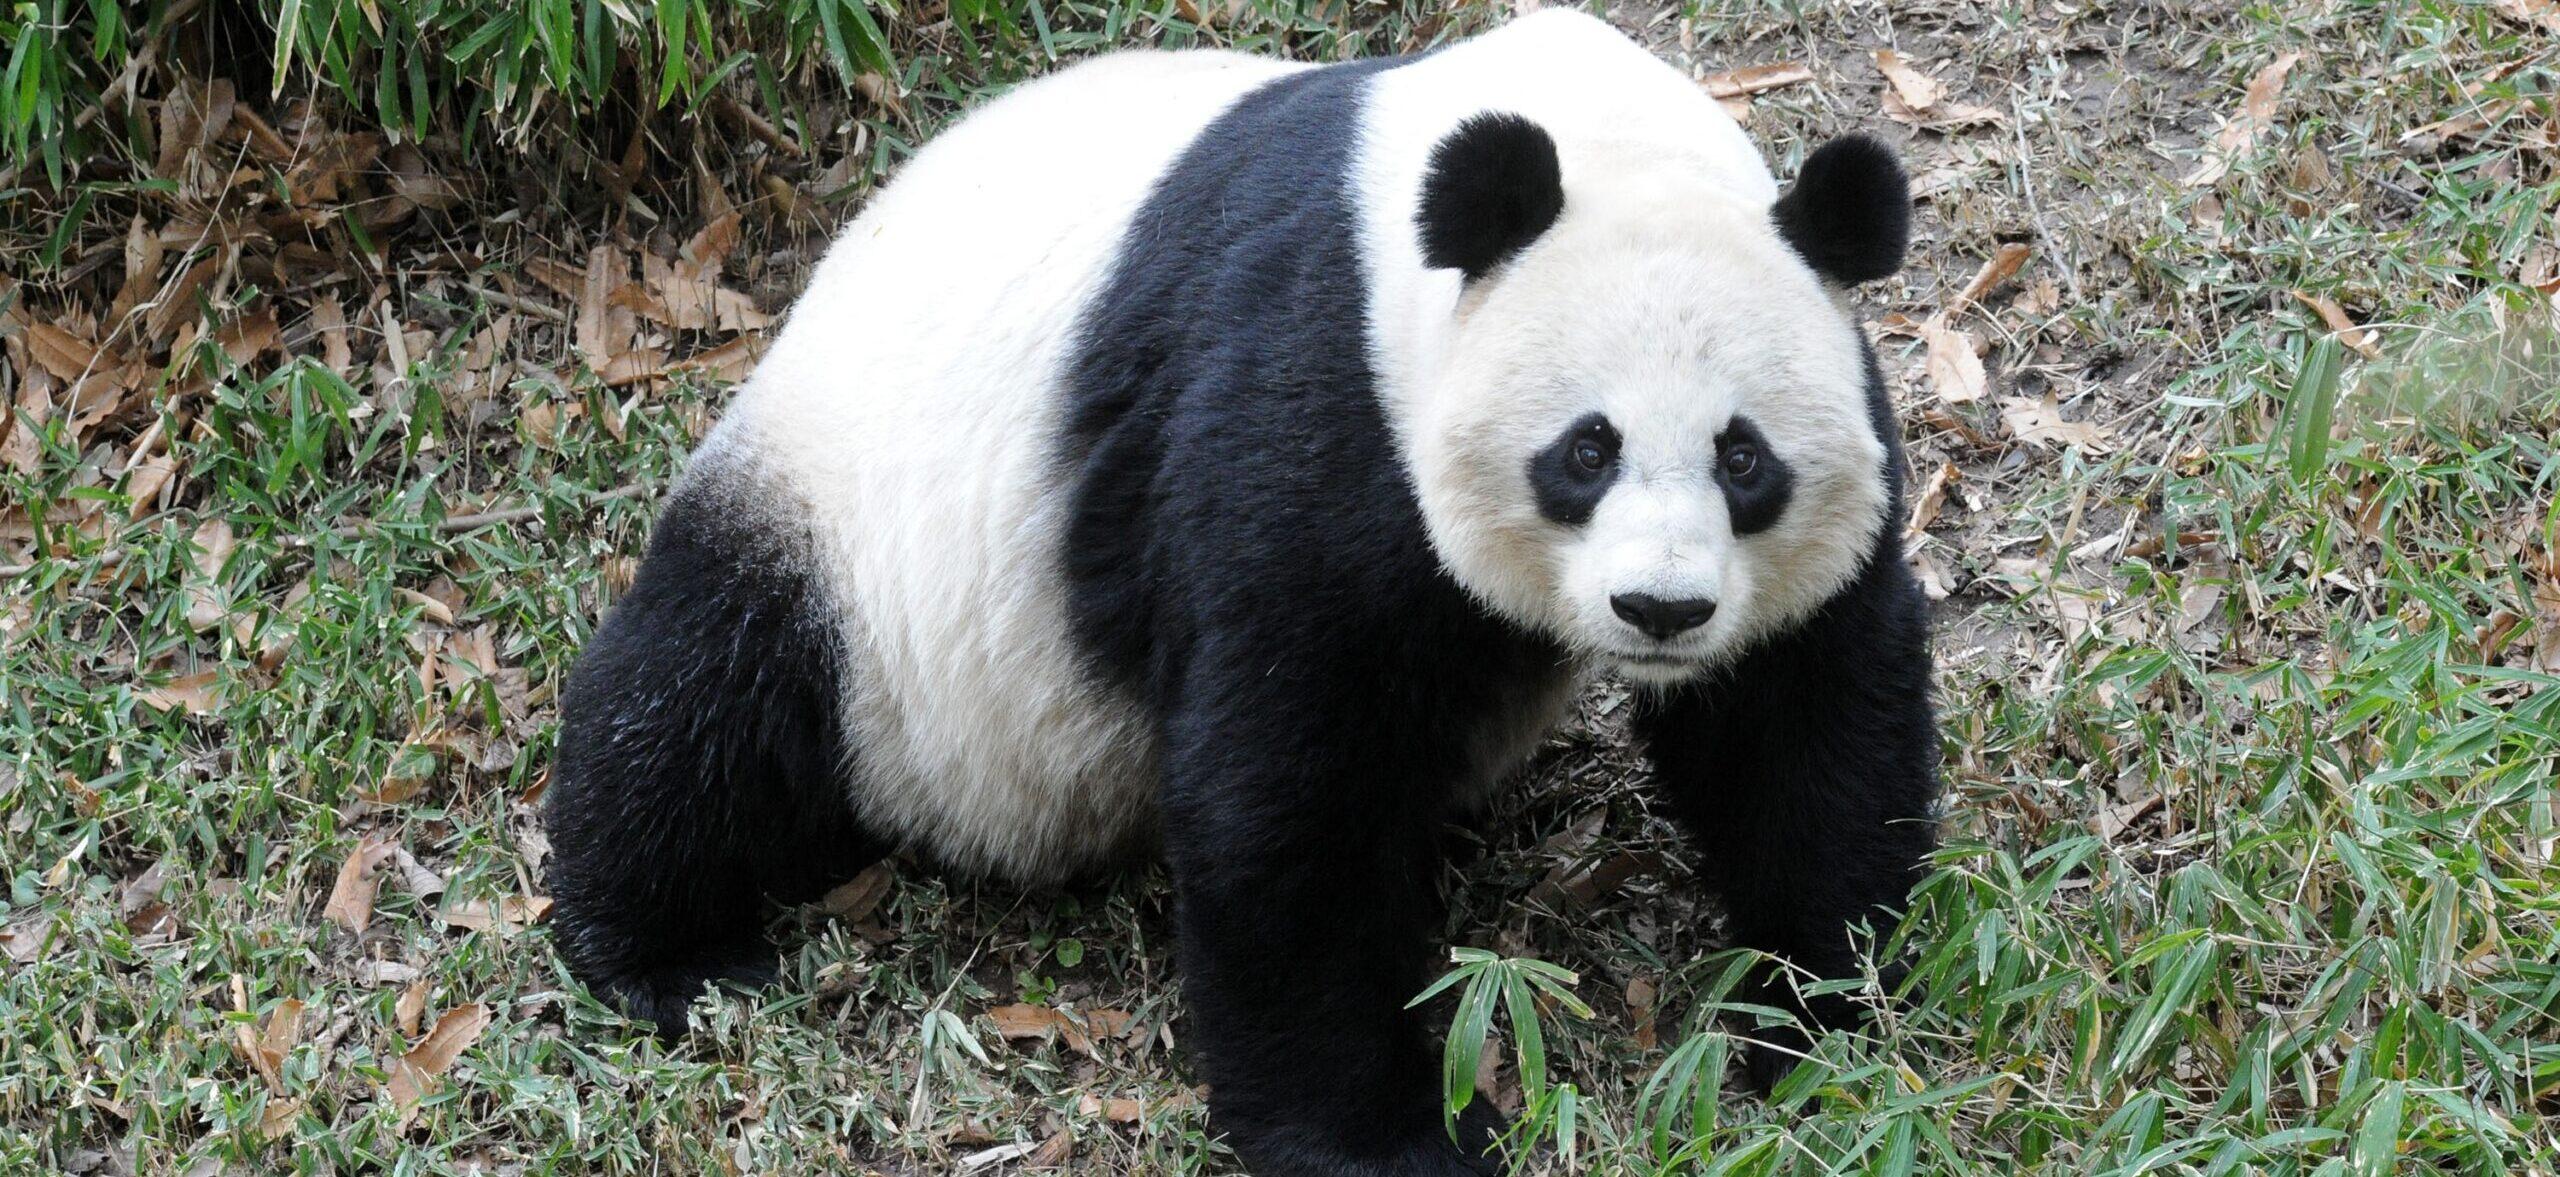 D.C. National Zoo Has Zero Pandas For The First Time In 23 Years